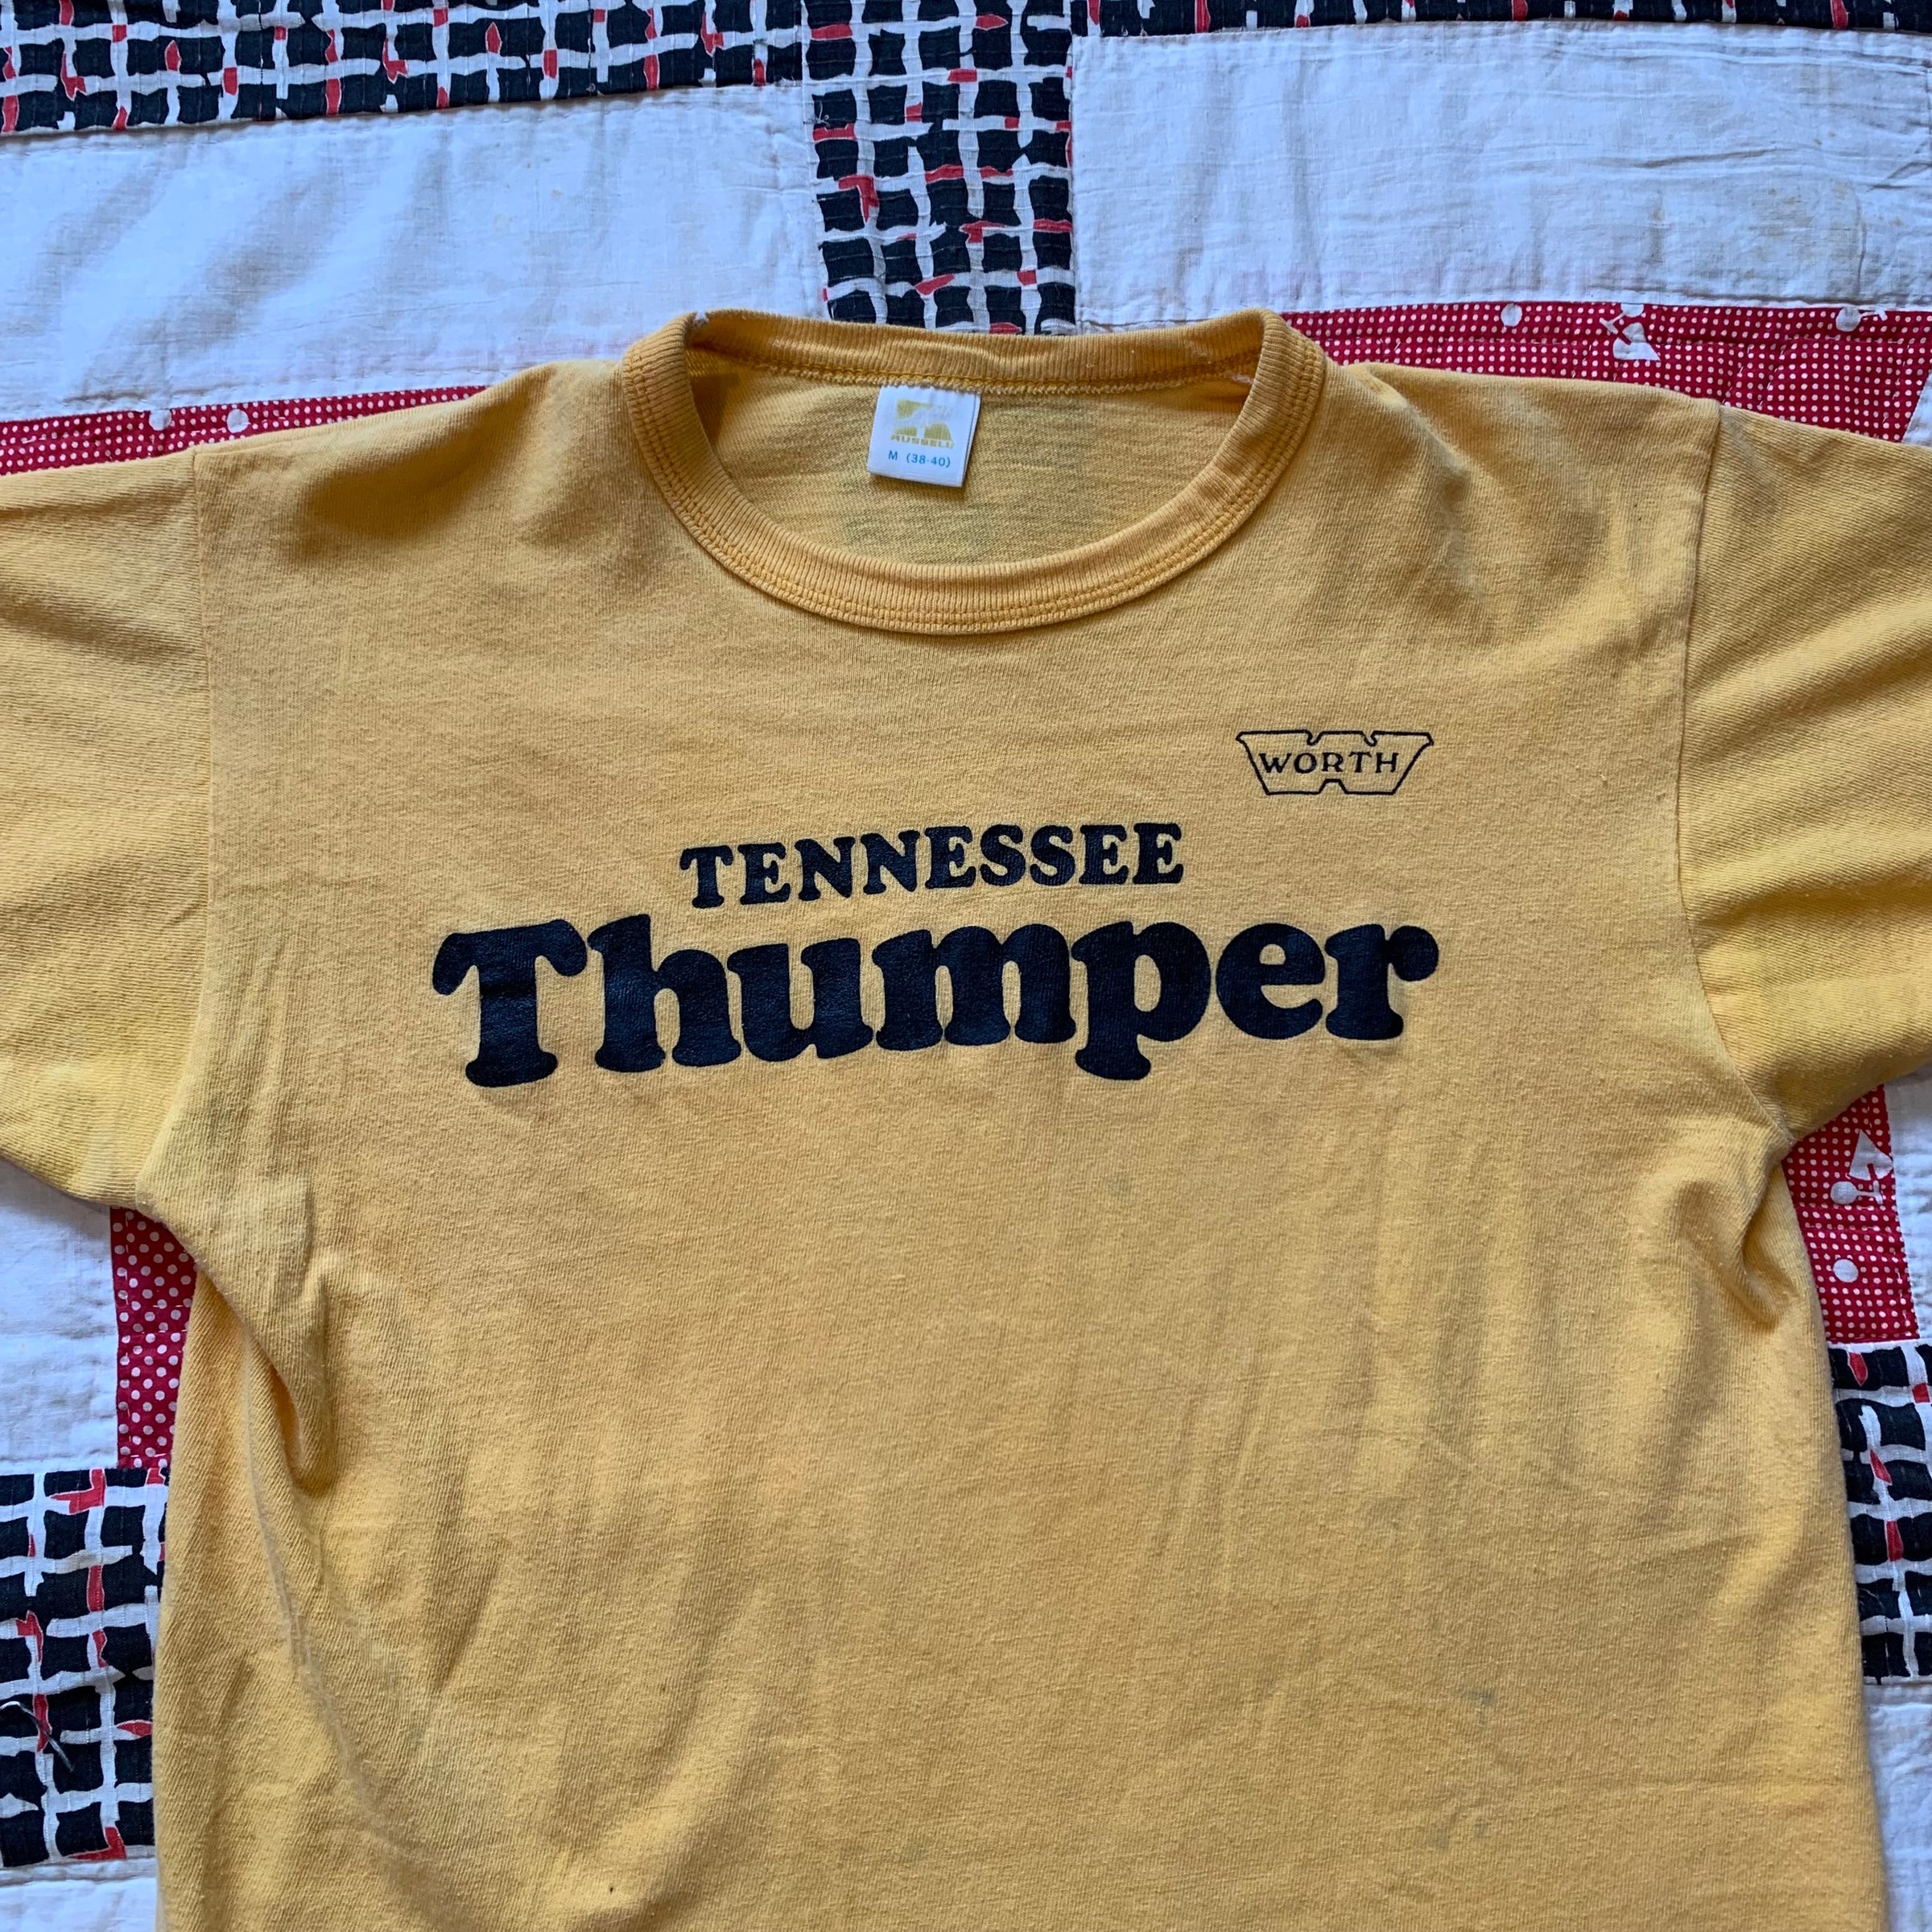 1970’s Tennessee Thumper Russell T-Shirt S/M